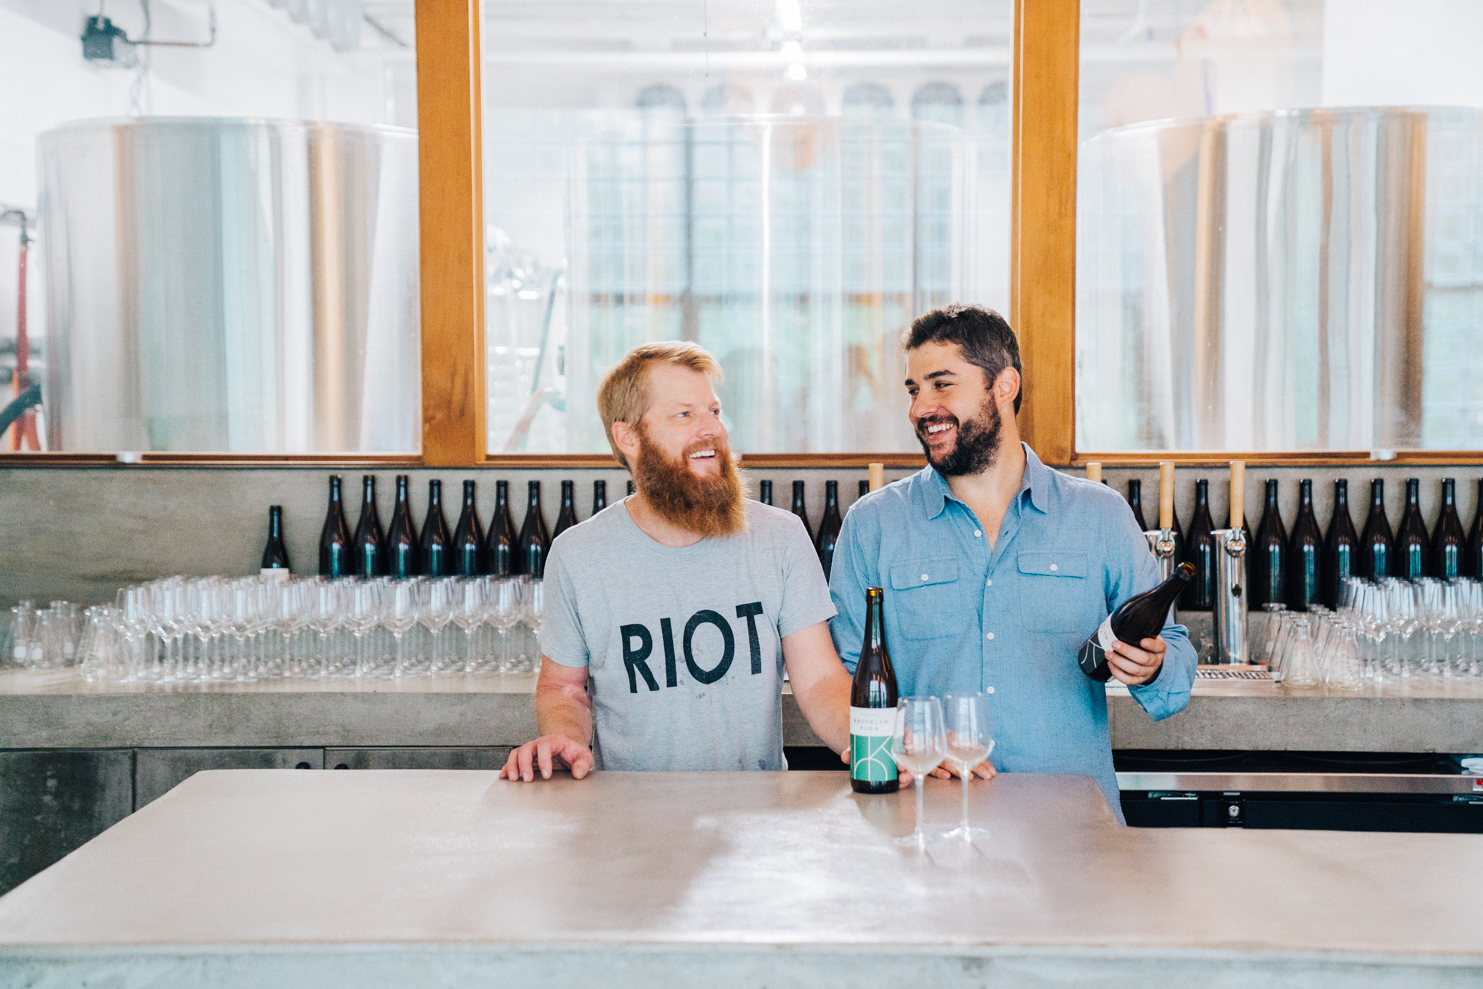 Two people are holding bottles of wine behind a bar.